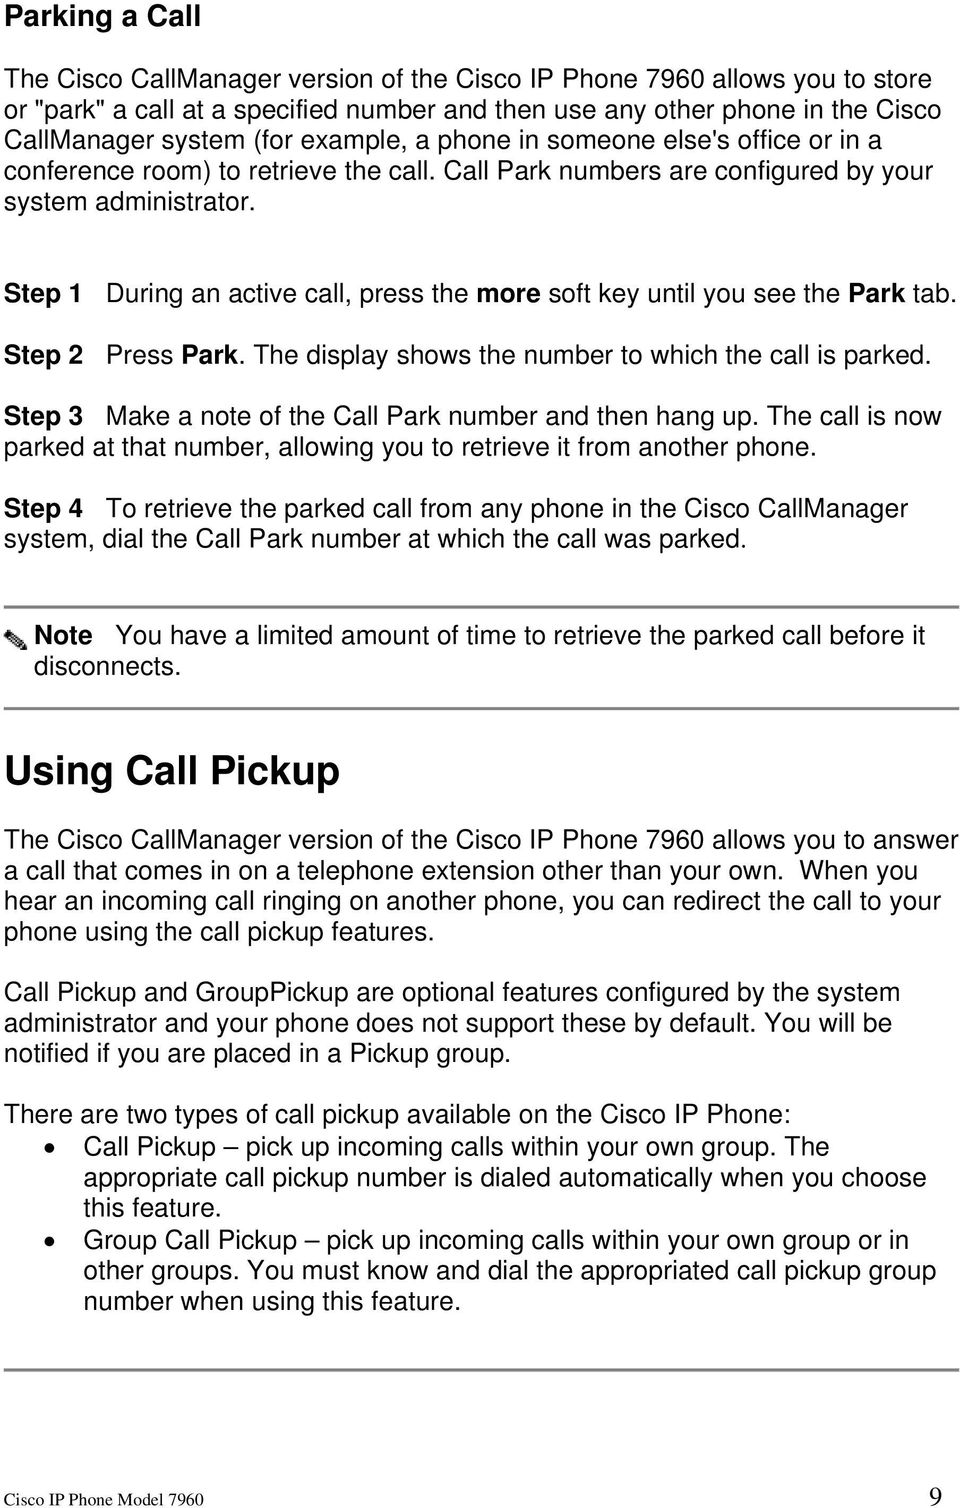 Step 1 During an active call, press the more soft key until you see the Park tab. Step 2 Press Park. The display shows the number to which the call is parked.